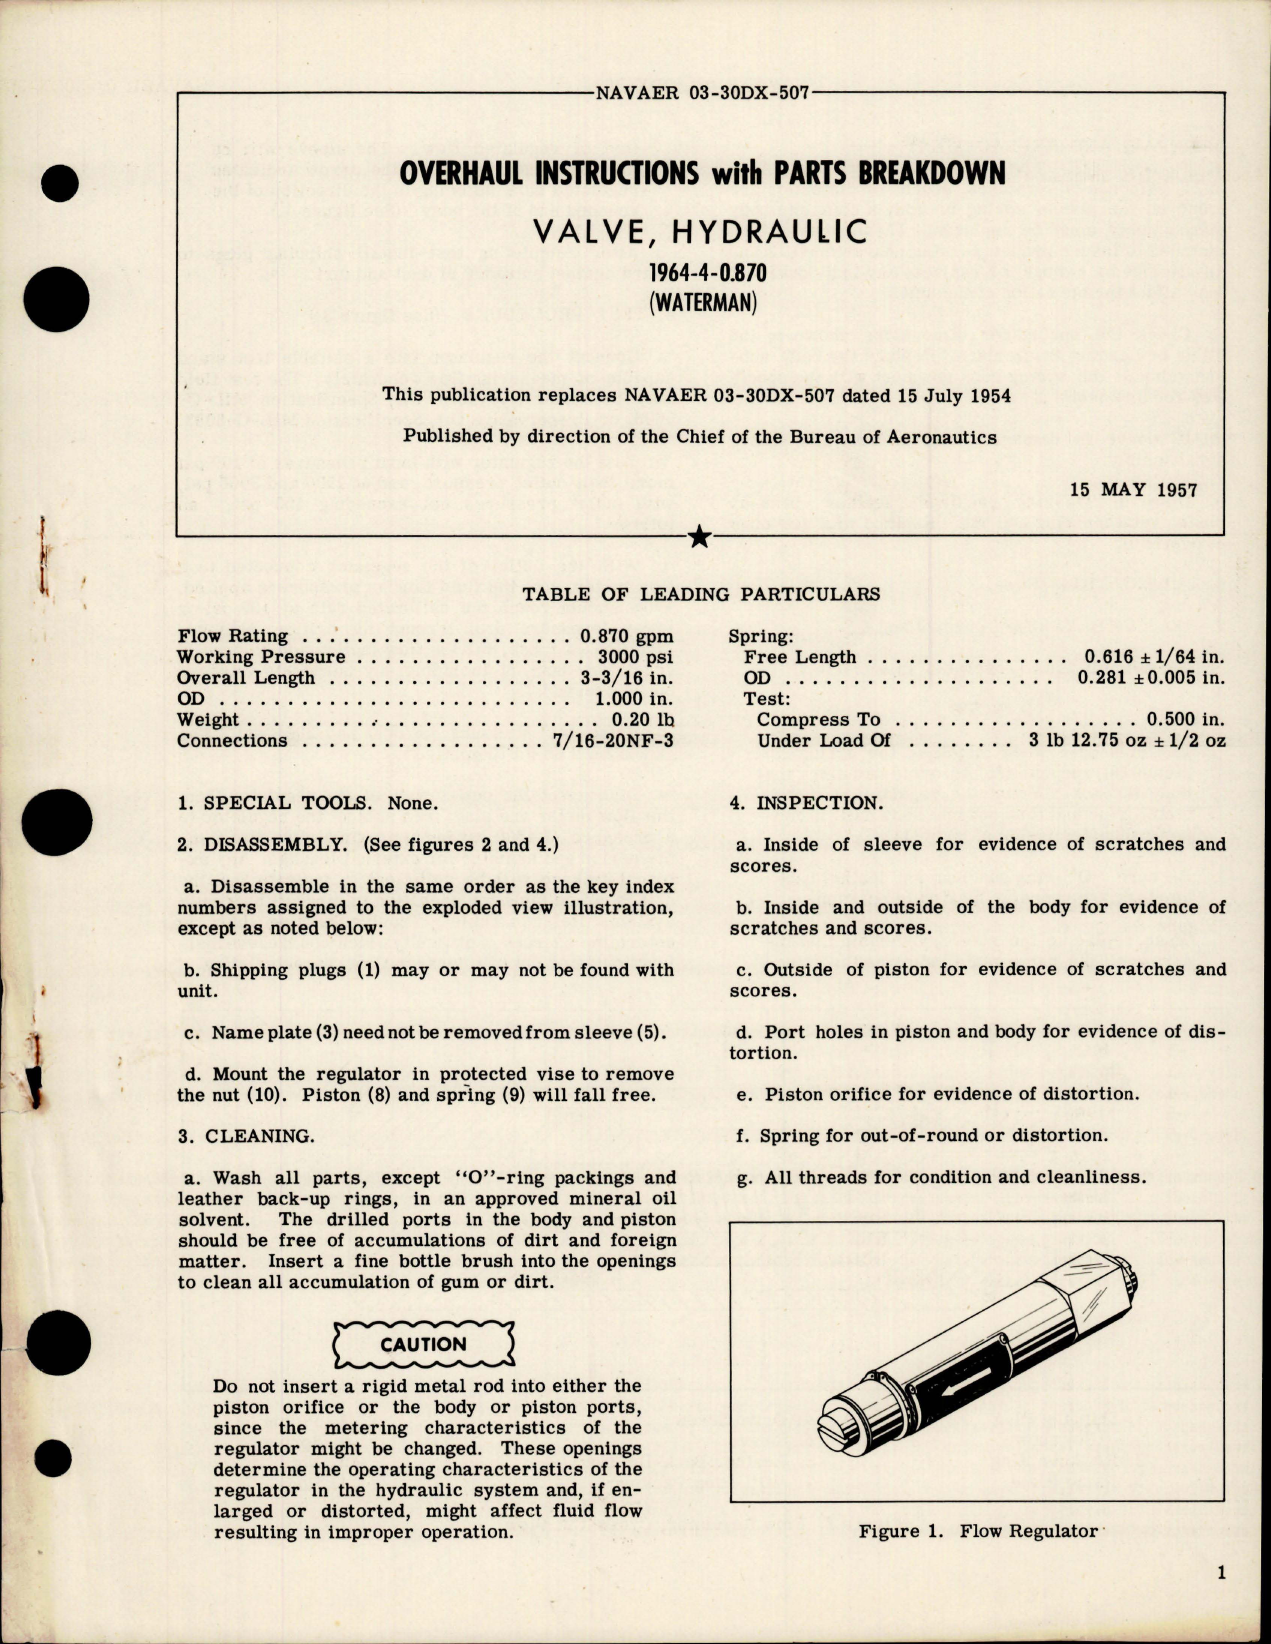 Sample page 1 from AirCorps Library document: Overhaul Instructions with Parts Breakdown for Hydraulic Valve - 1964-4-0.870 